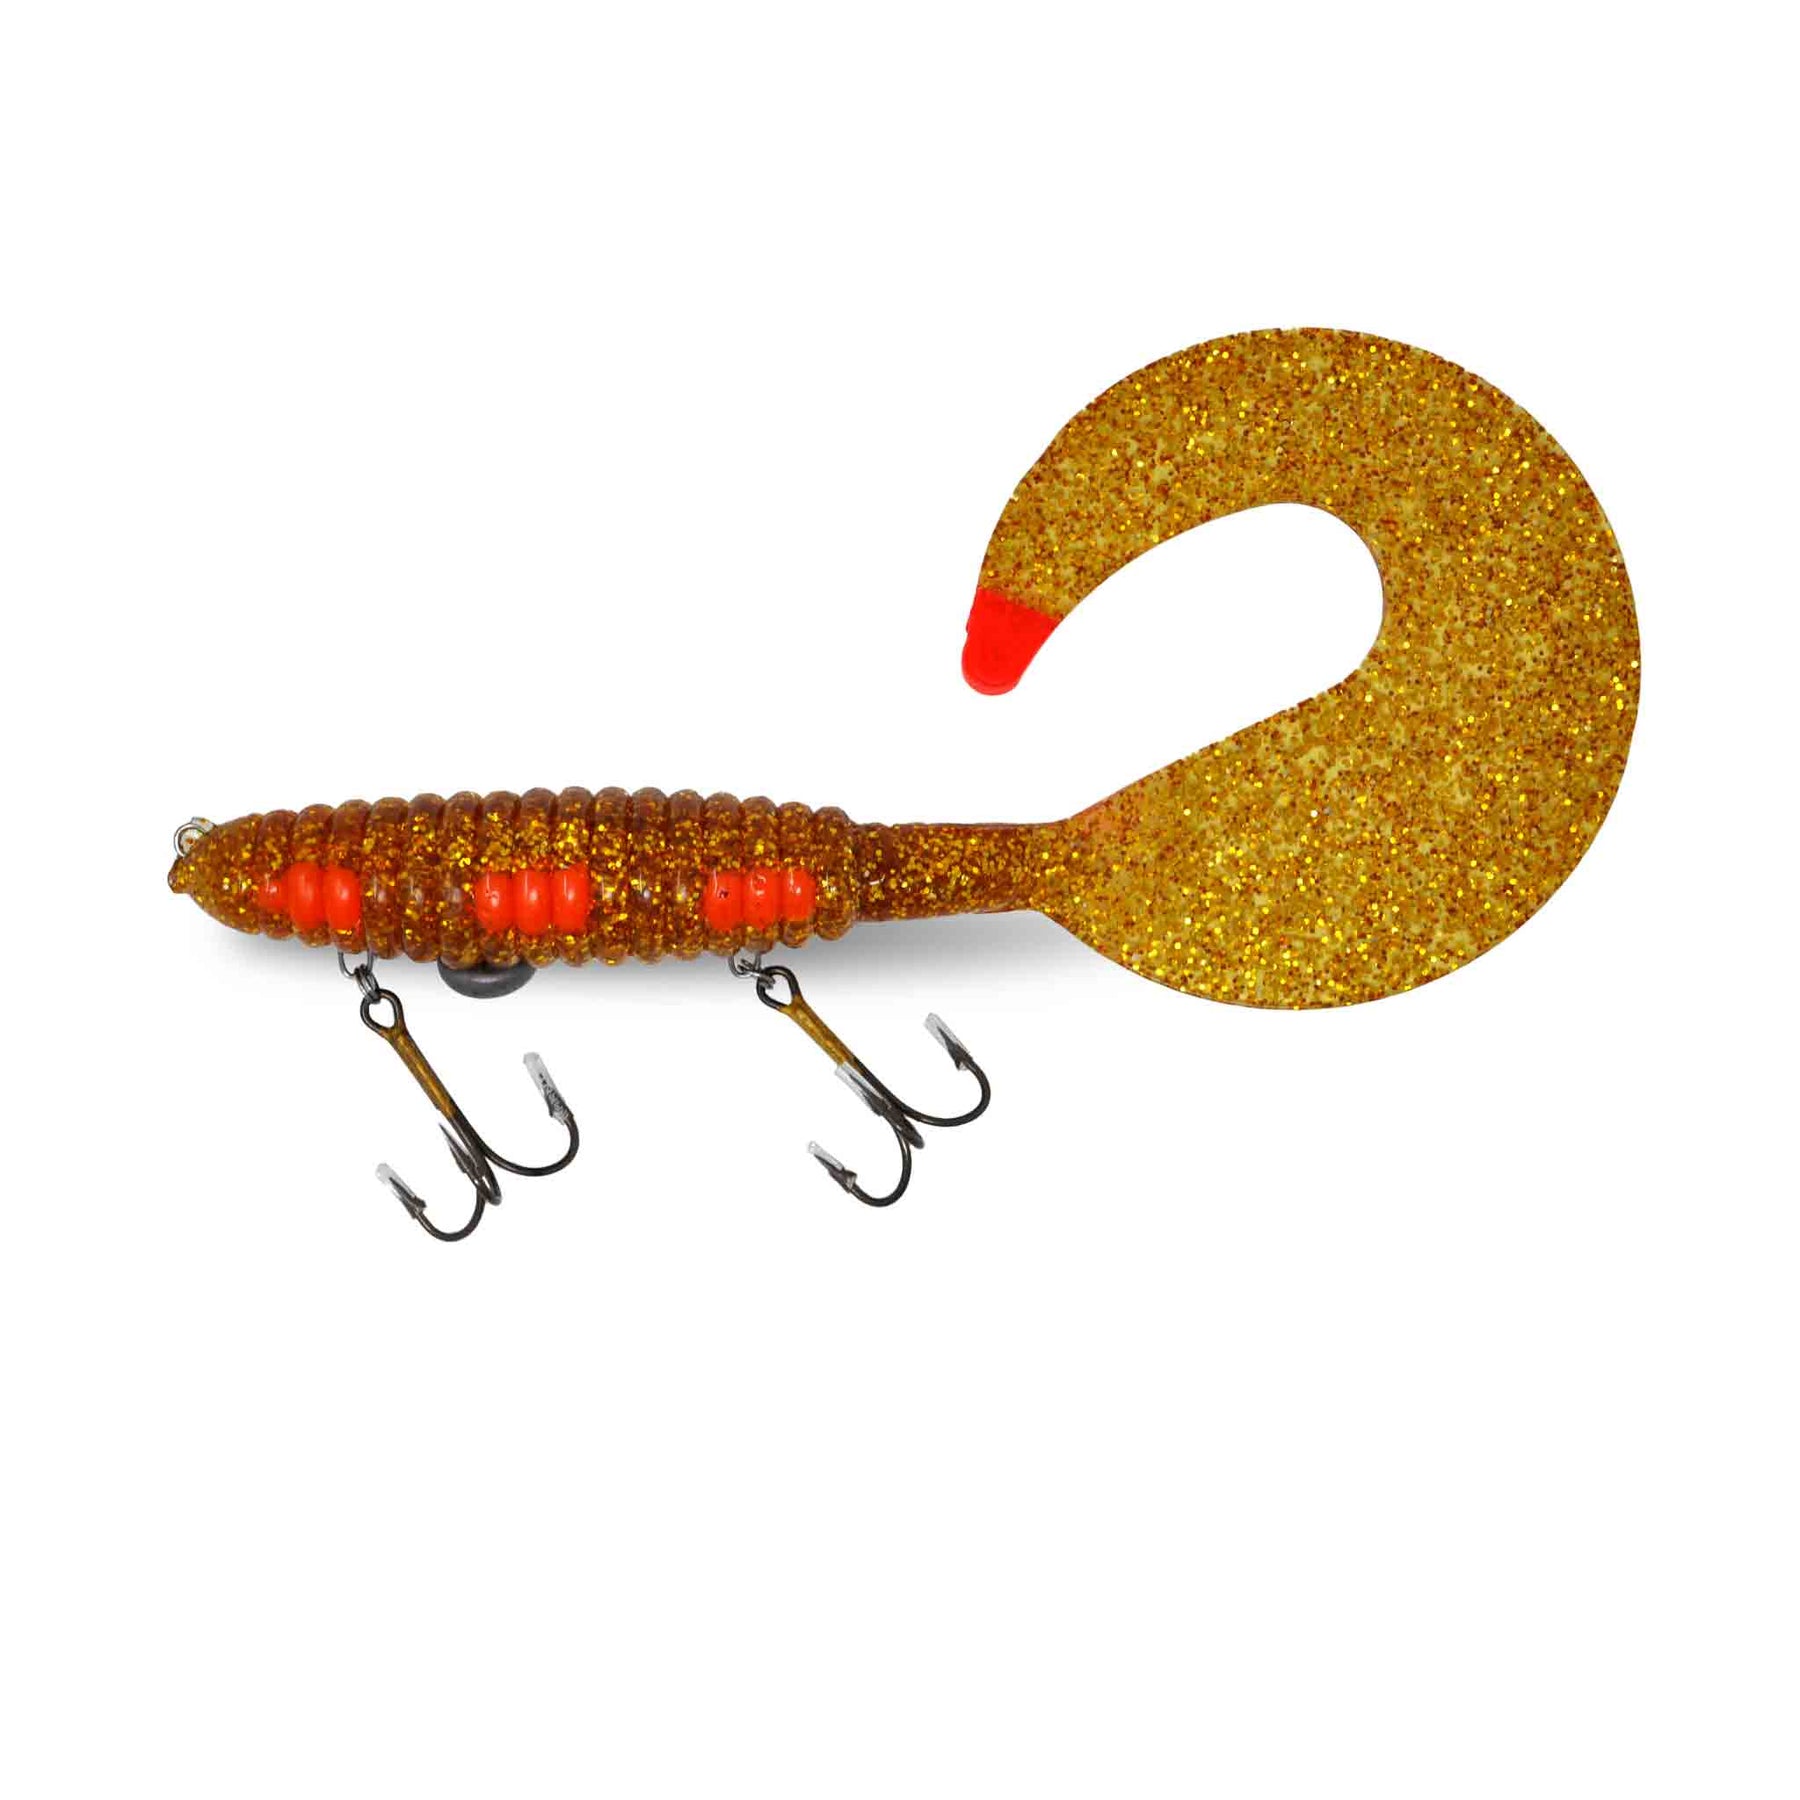 View of Rubber Whale Tail Plastics 8" Walleye Orange Dots (Ezoko Custom) available at EZOKO Pike and Musky Shop